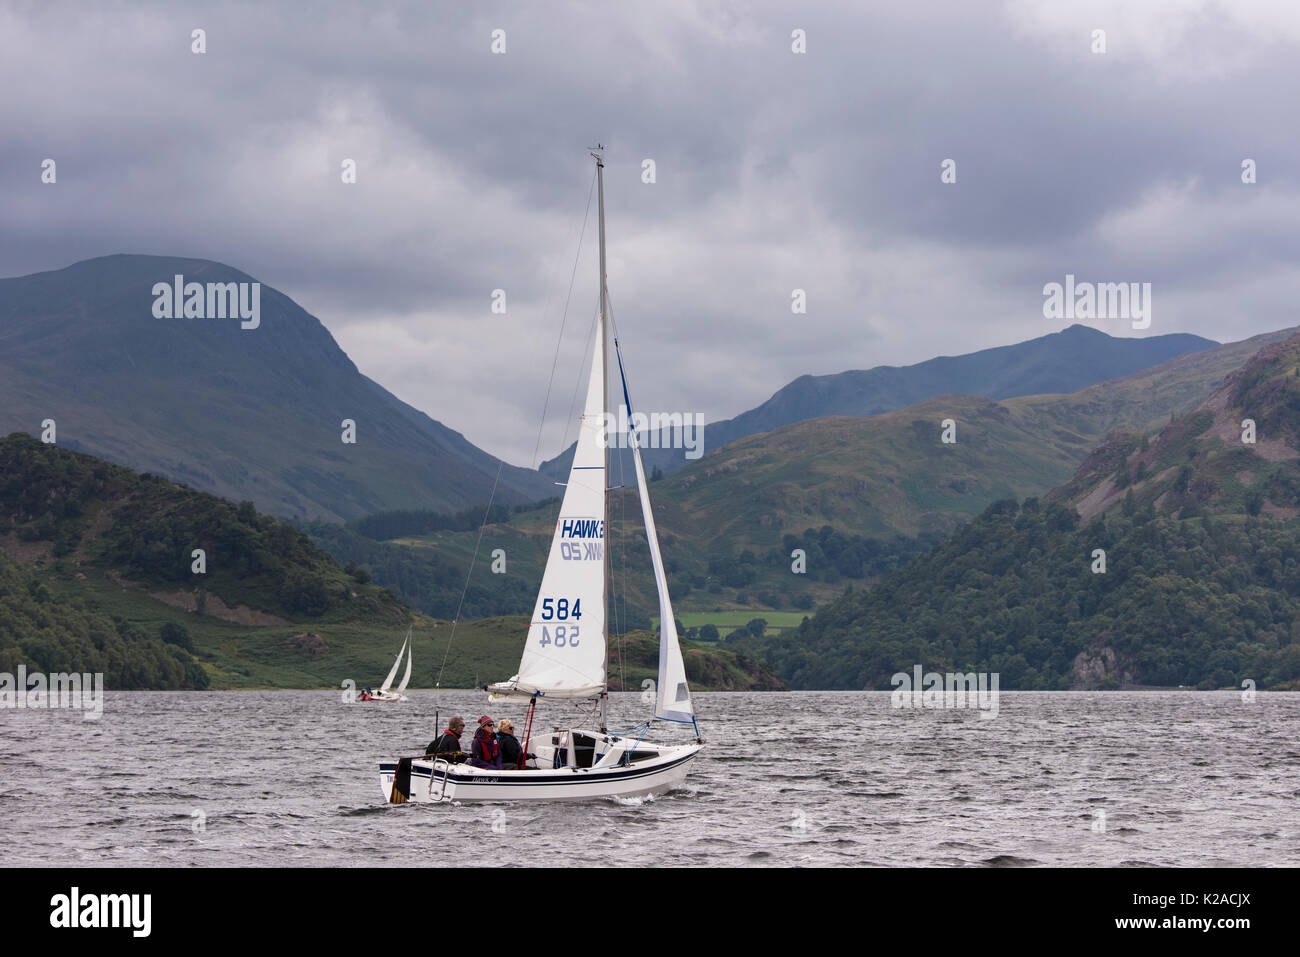 By rolling hills & under grey sky, people are sailing in small  boats on Ullswater - view to Glenridding & Patterdale, Lake District, England, UK. Stock Photo